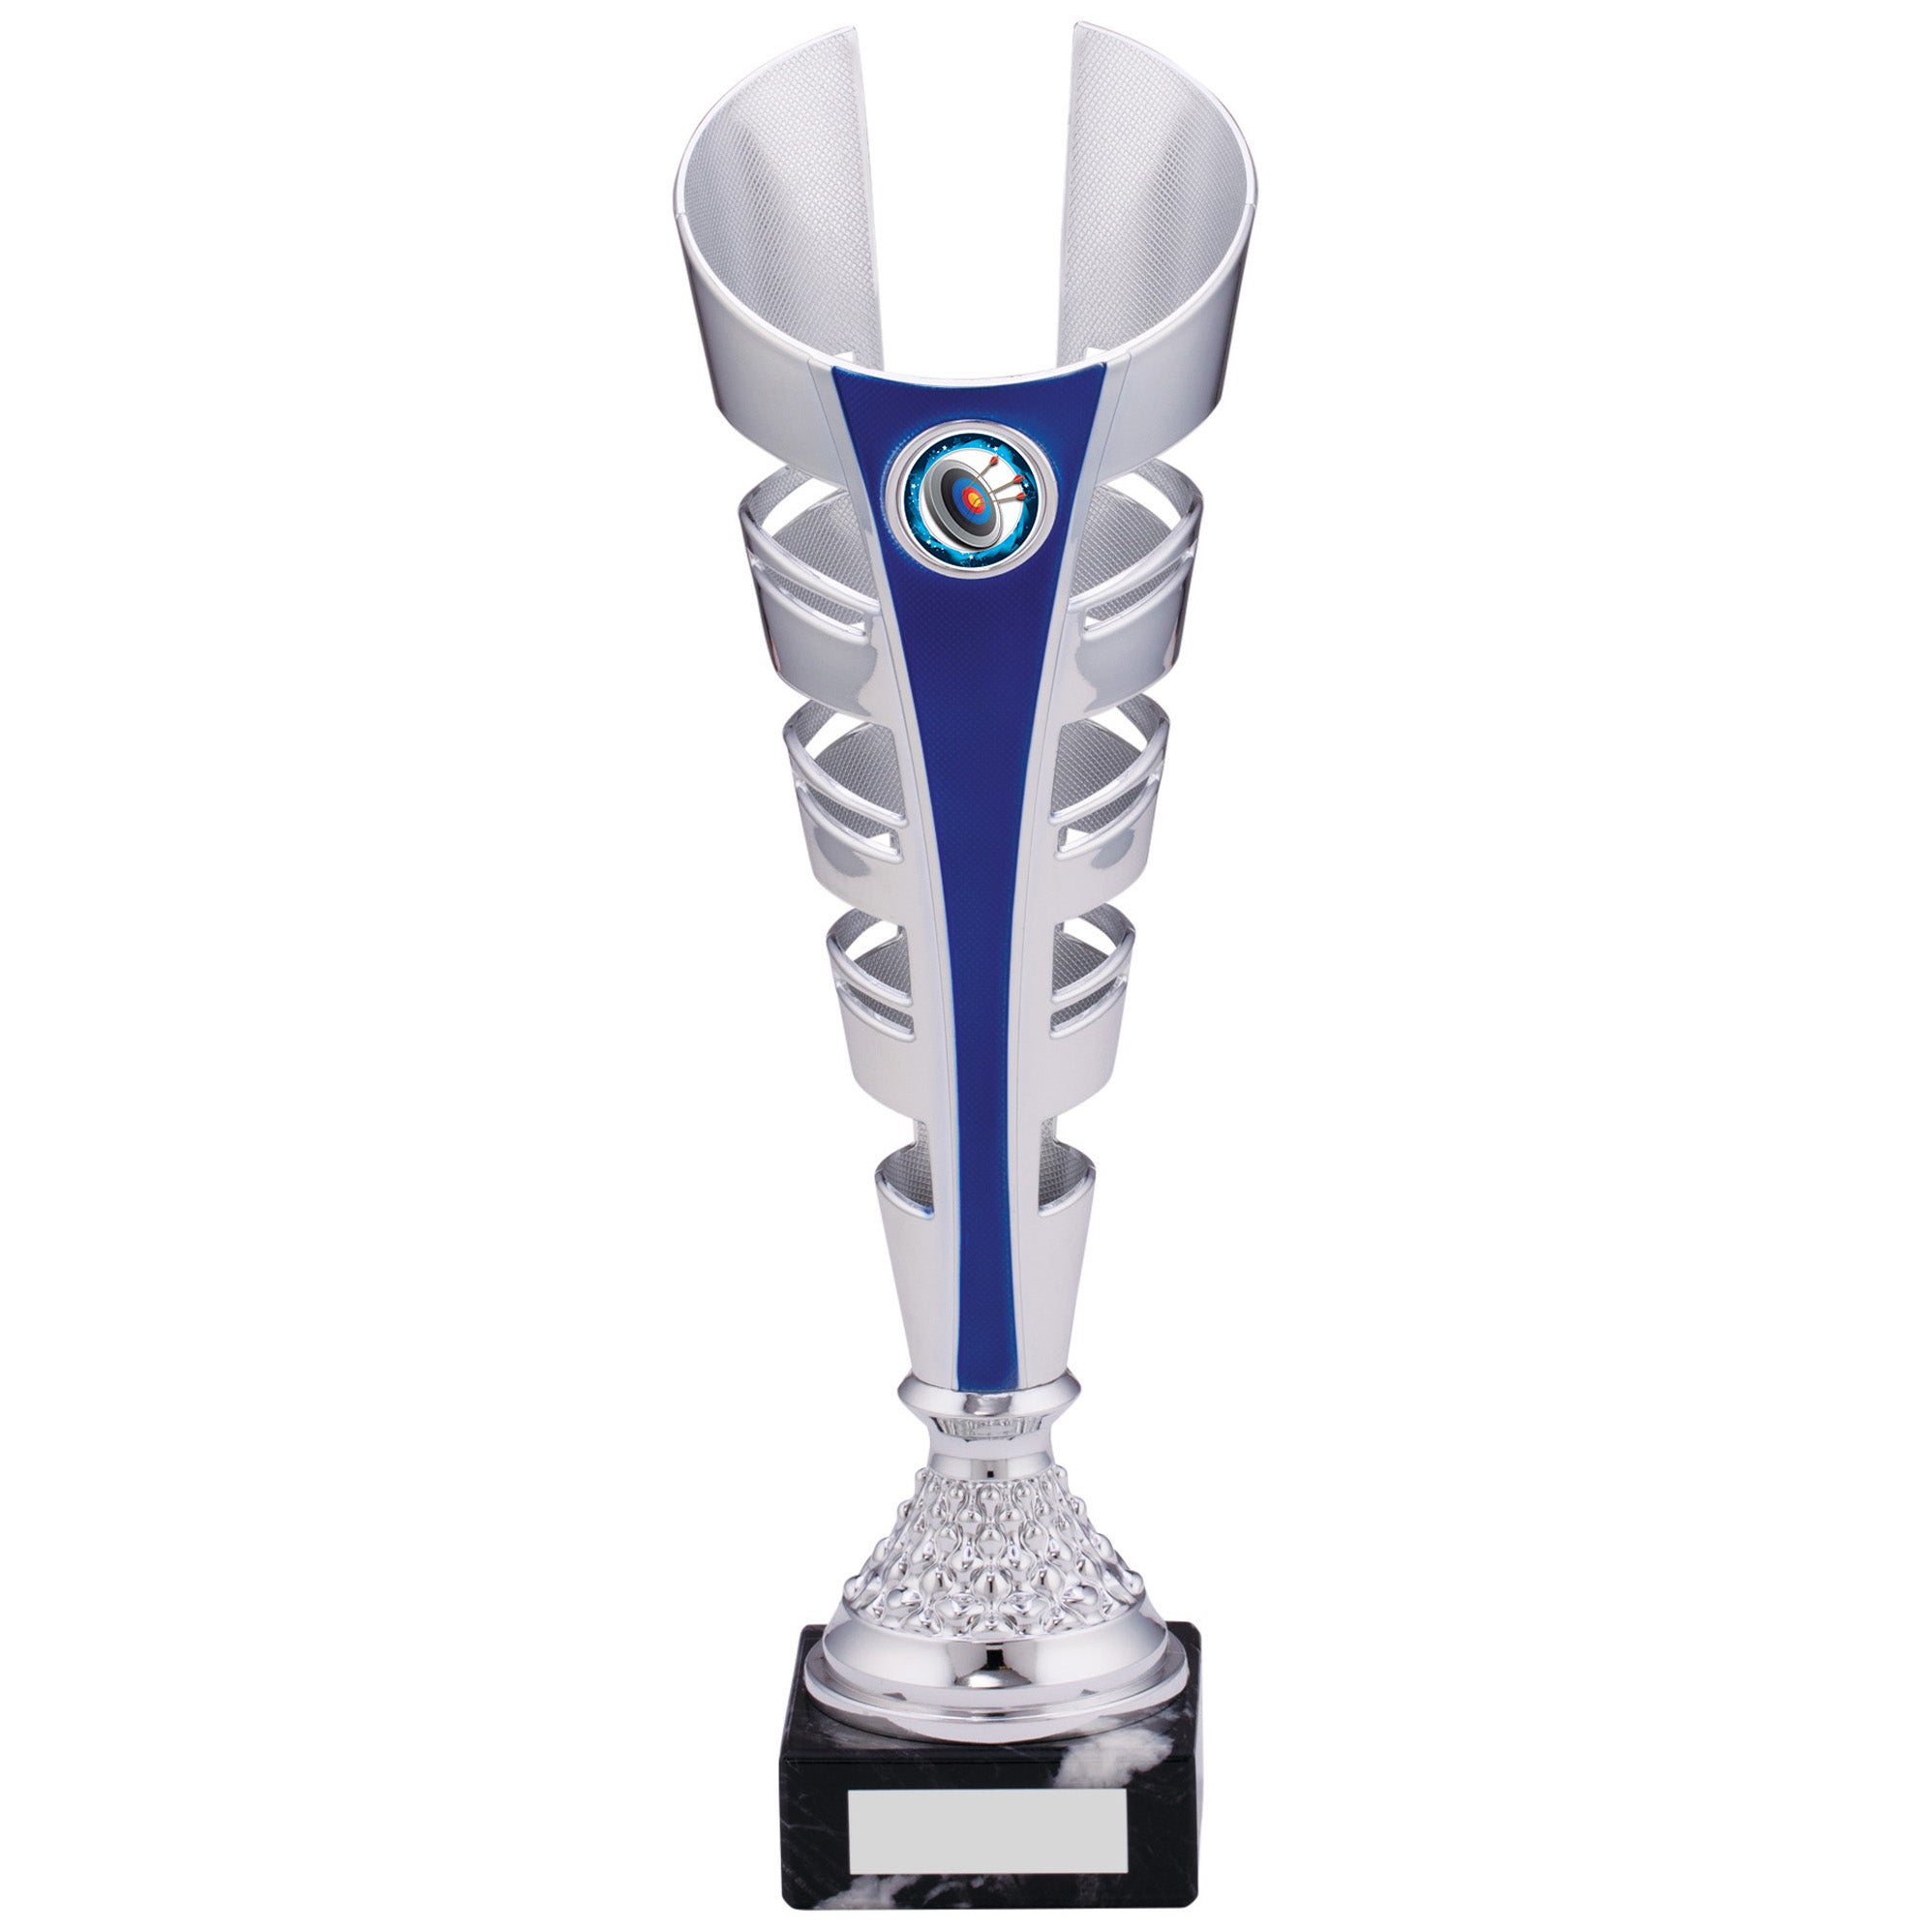 Silver and Blue Futuristic Plastic Trophy Cup on Marble Base